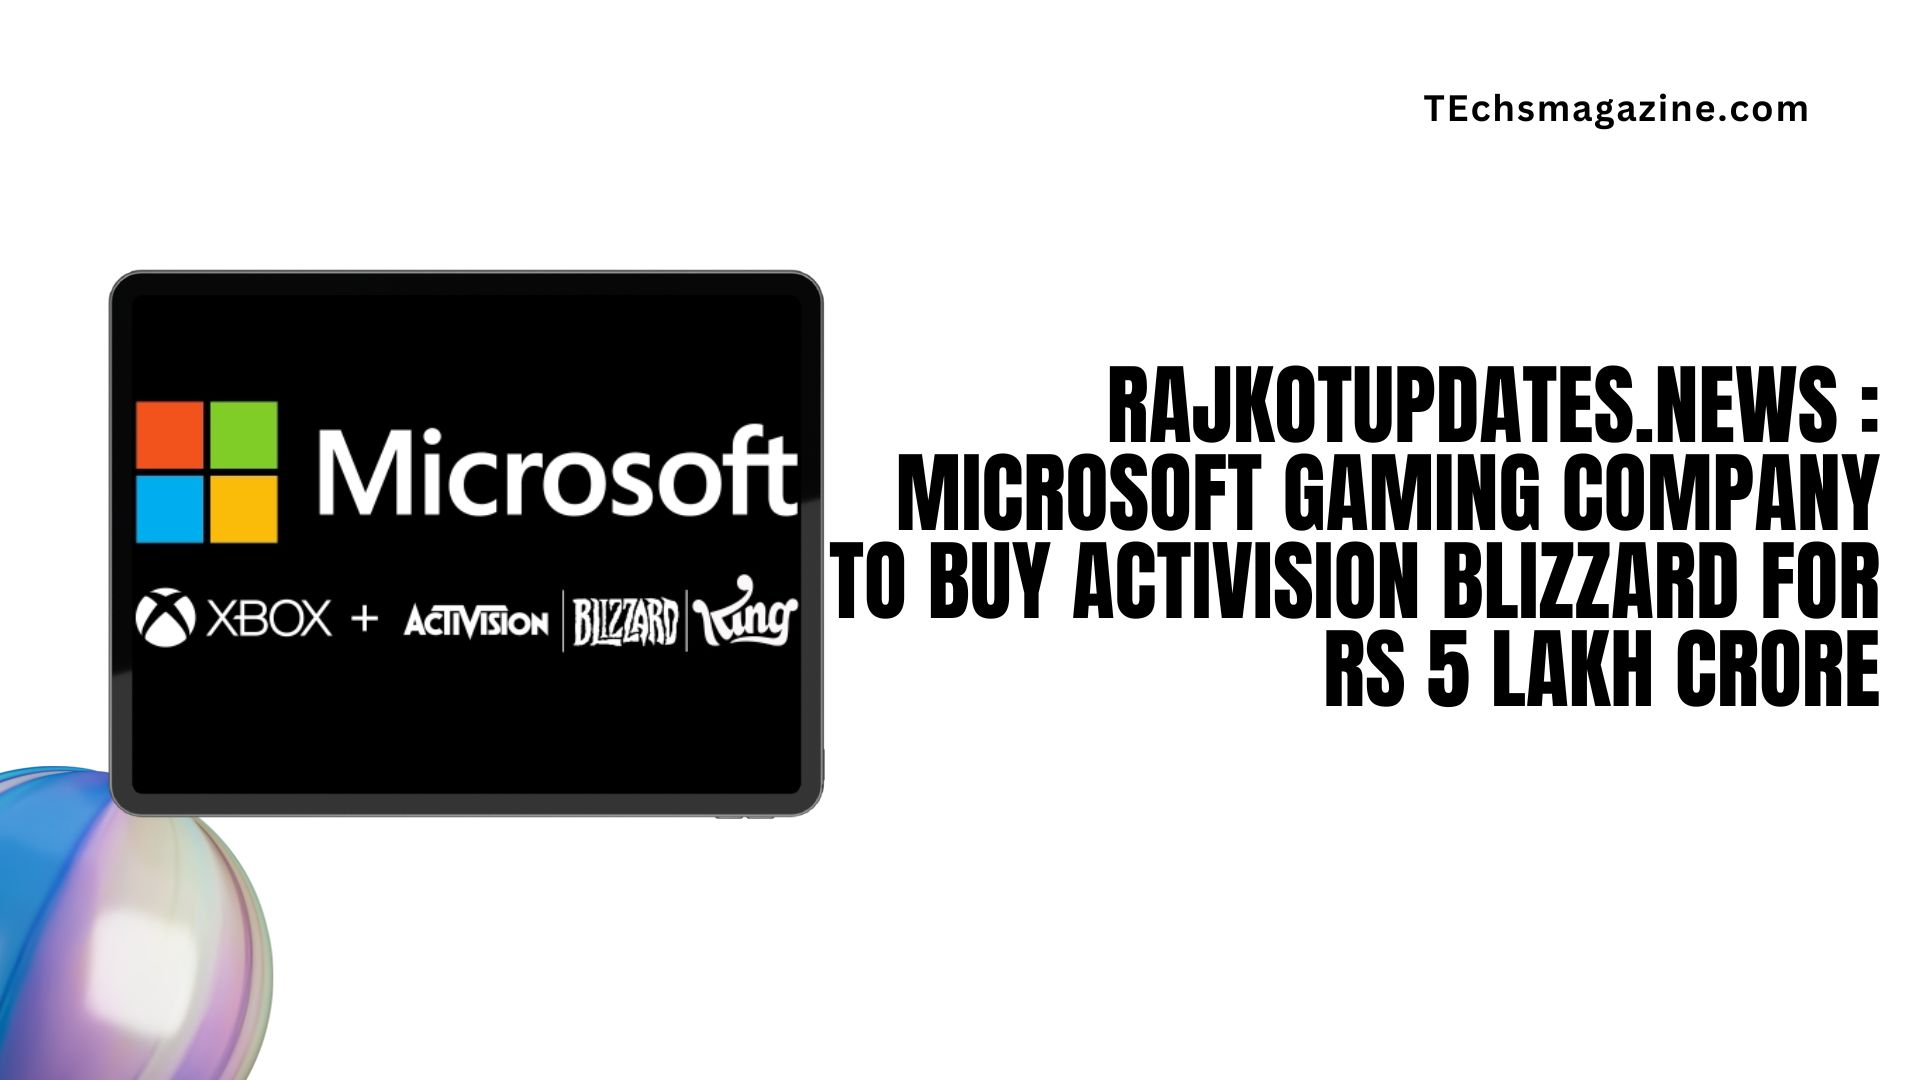 Rajkotupdates.news Microsoft Gaming Company To Buy Activision Blizzard For rs 5 lakh Crore